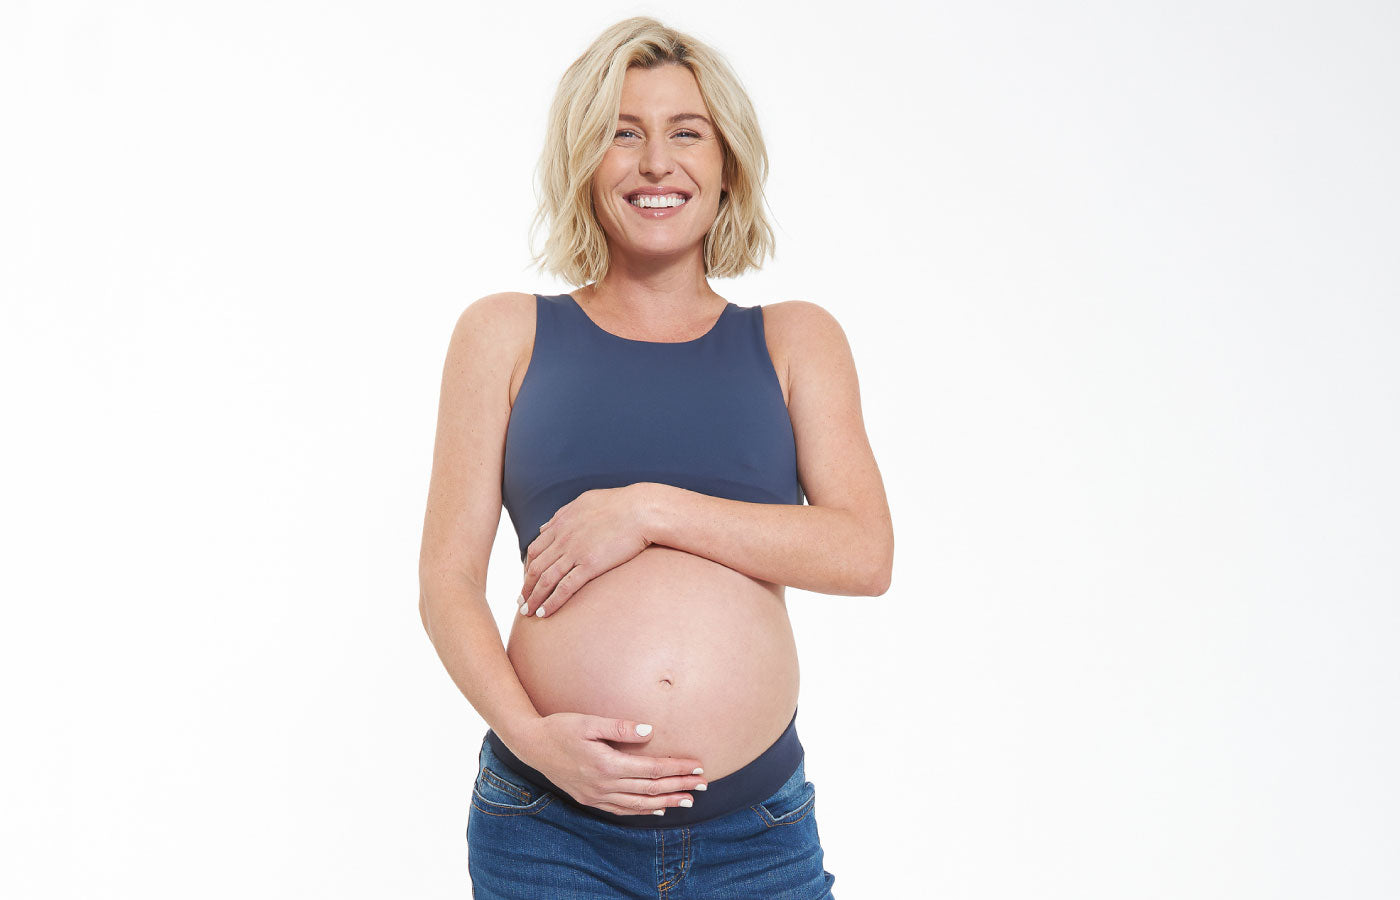 Pregnant? Here’s How To Bond With Your Baby Bump.